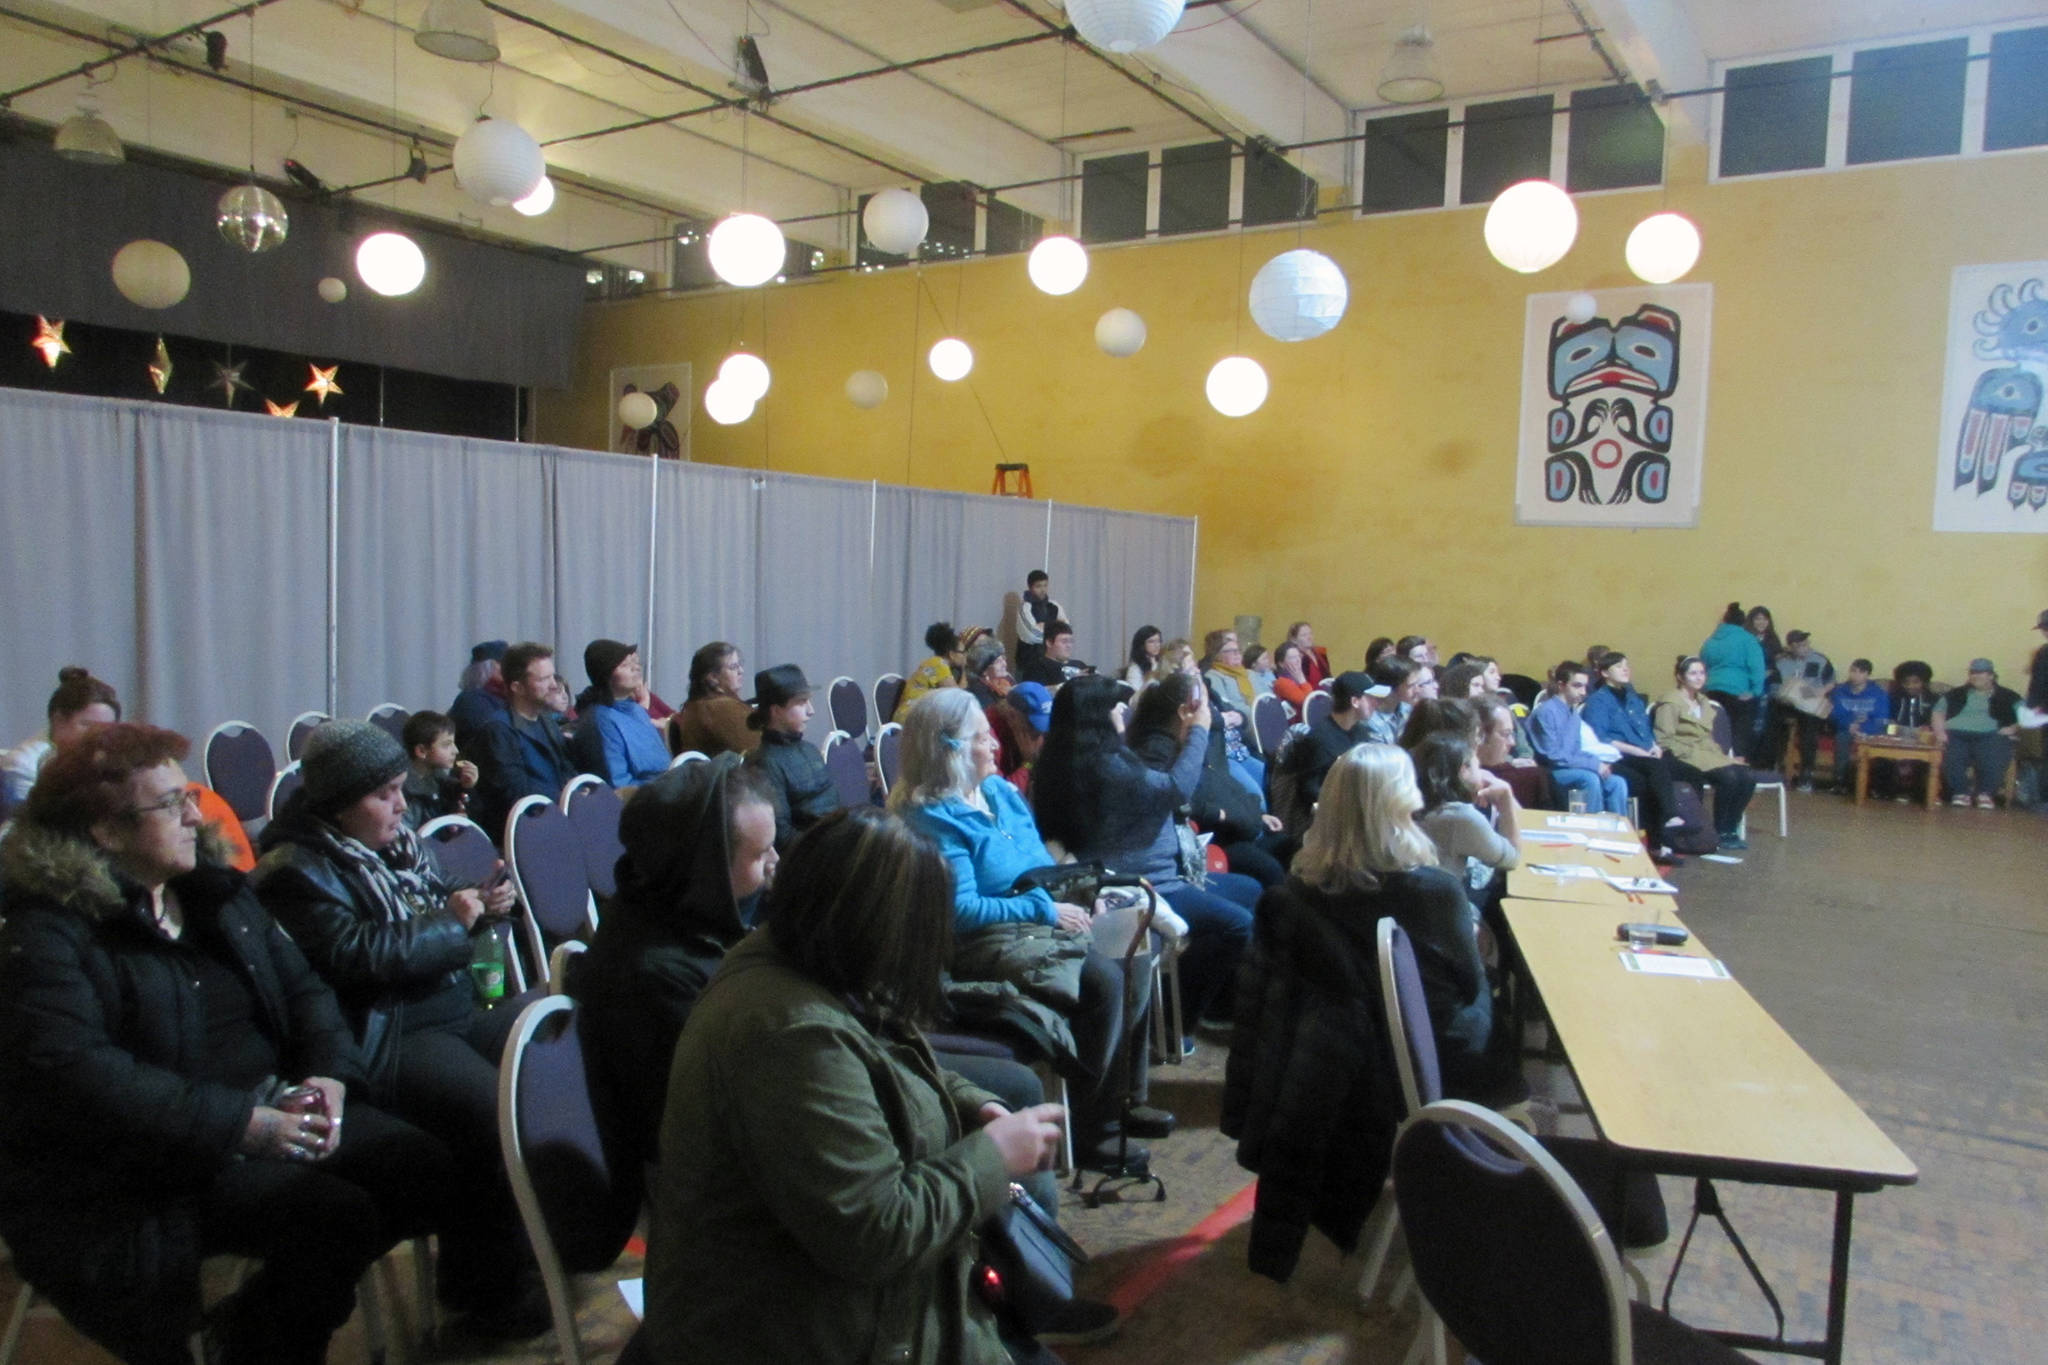 Organizers said the crowd at the Juneau Arts & Culture Center for the Poetry Out Loud Regional Competition, Tuesday, Feb. 12, 2019, was larger than usual. (Ben Hohenstatt | Capital City Weekly)